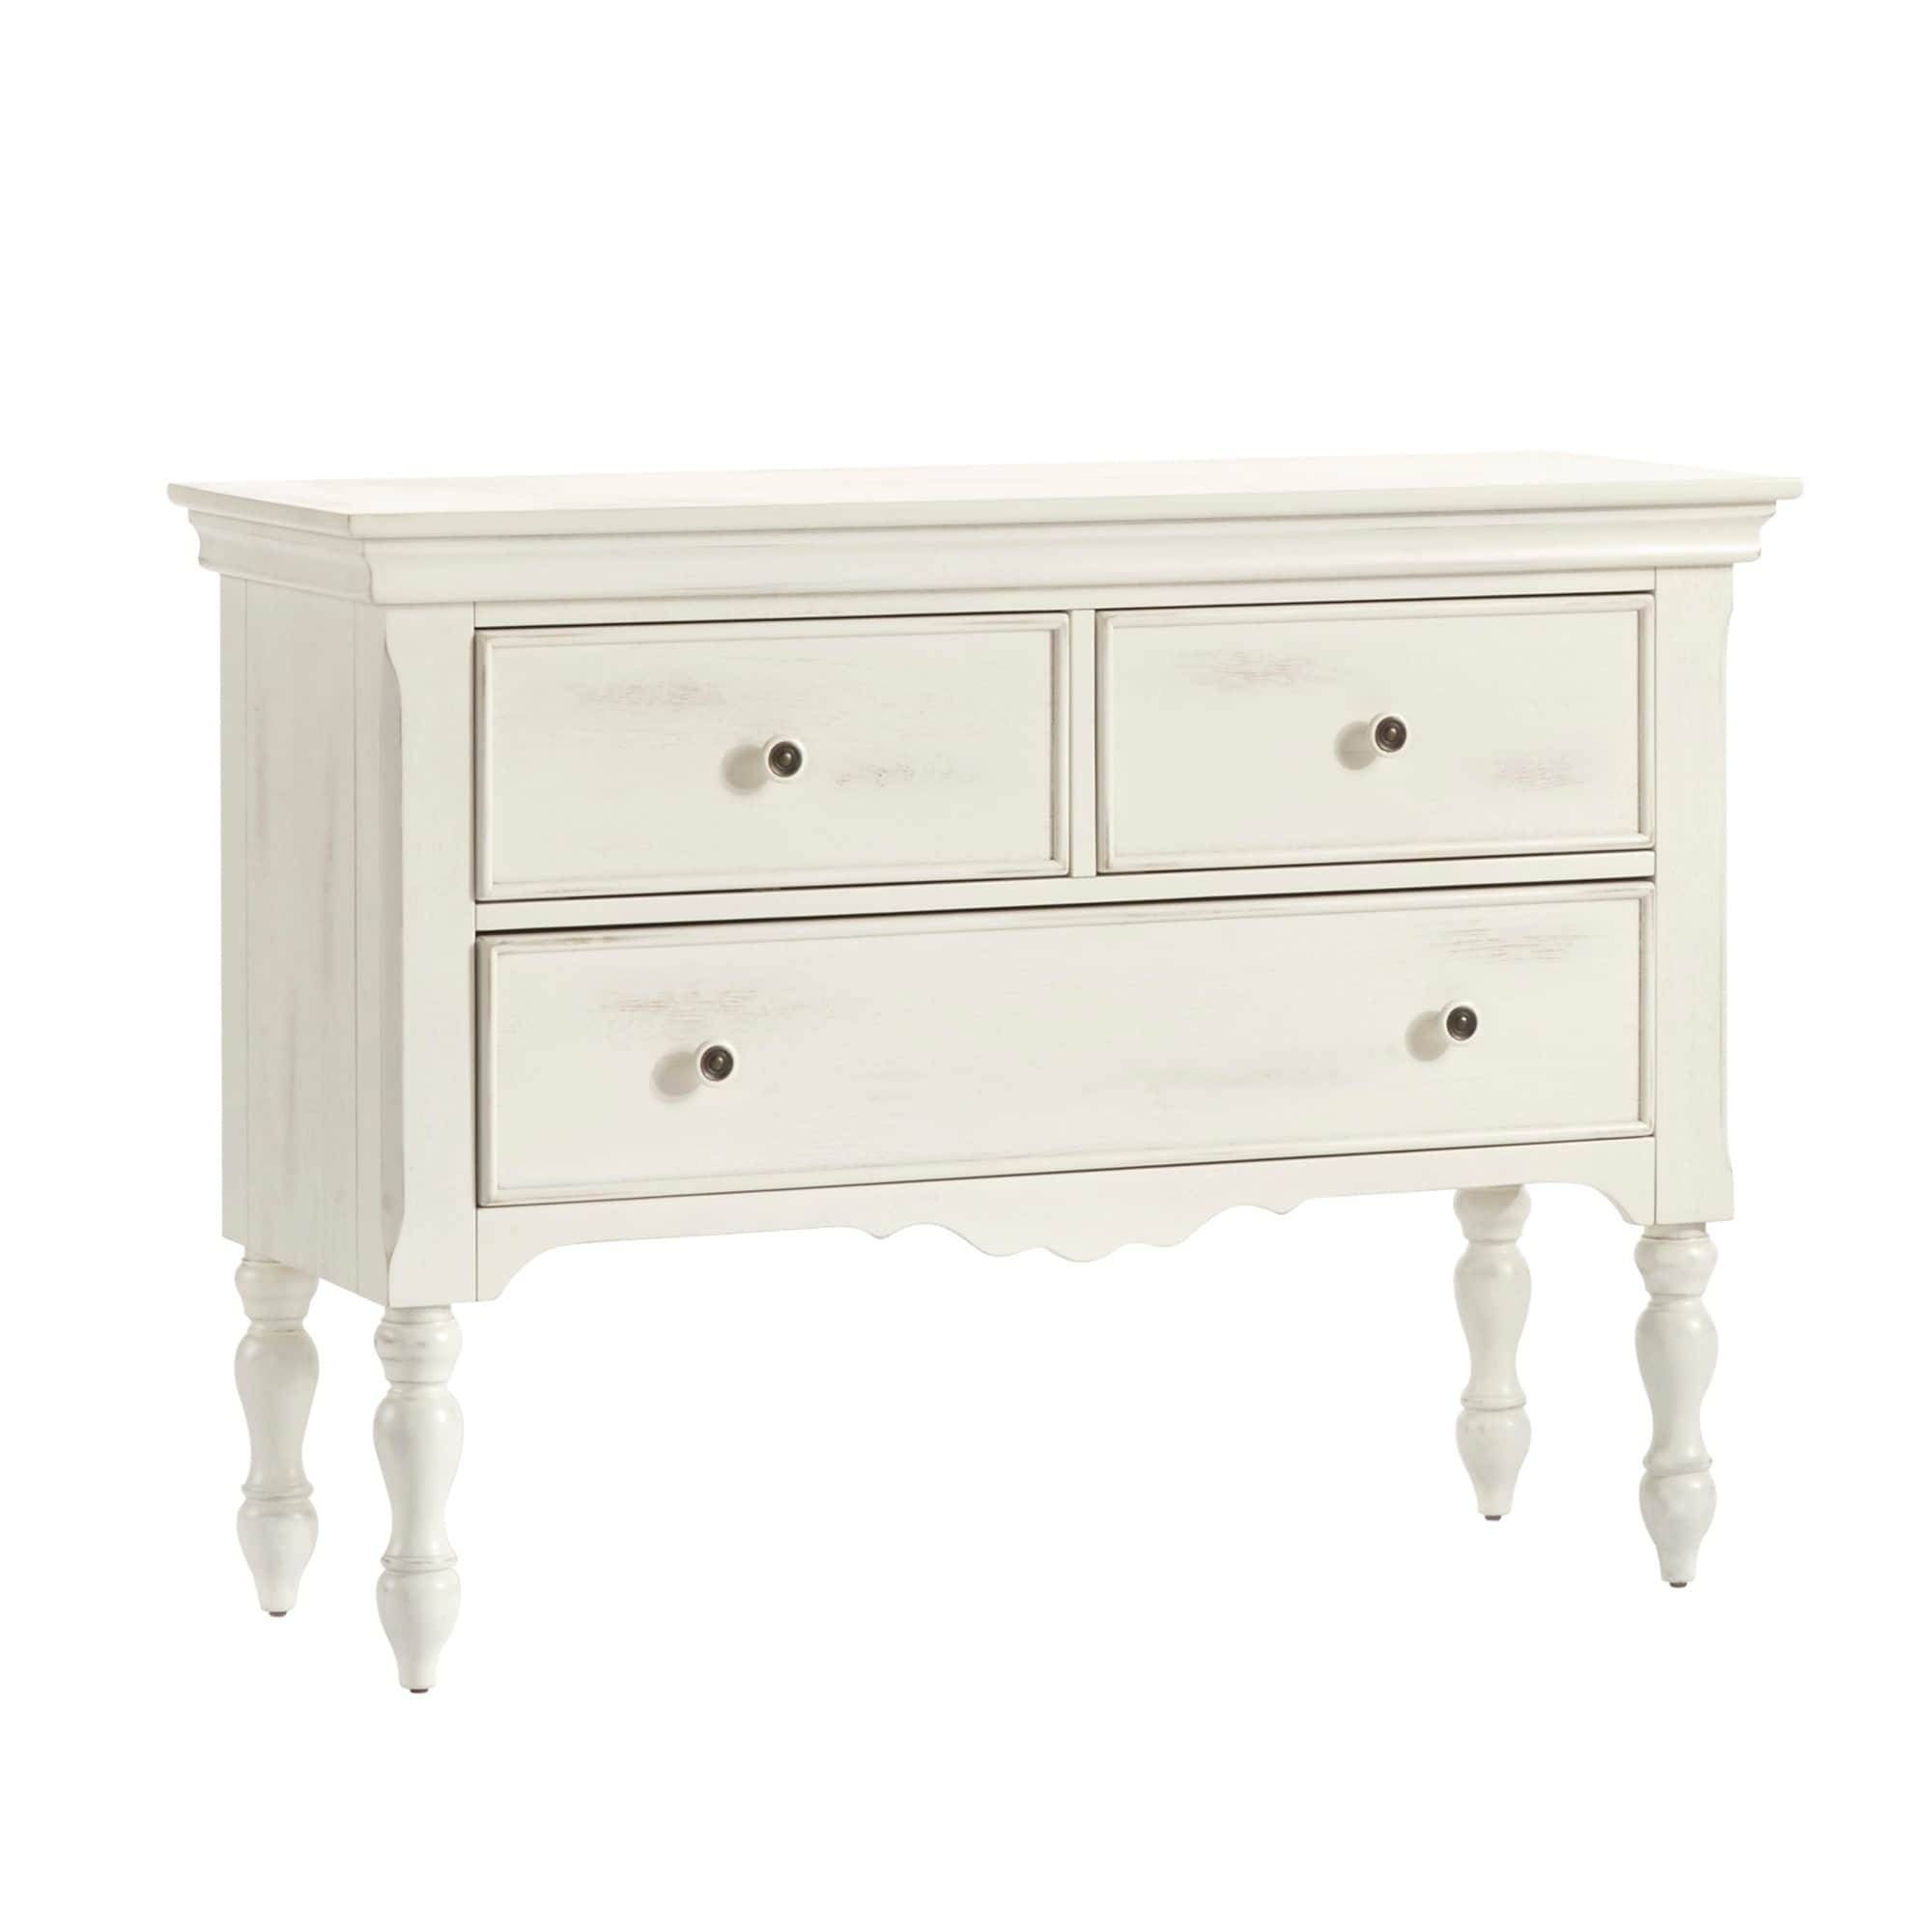 Mckay Country Antique White Buffet Storage Serverinspire Q With Regard To White Sideboard Tables (View 13 of 15)